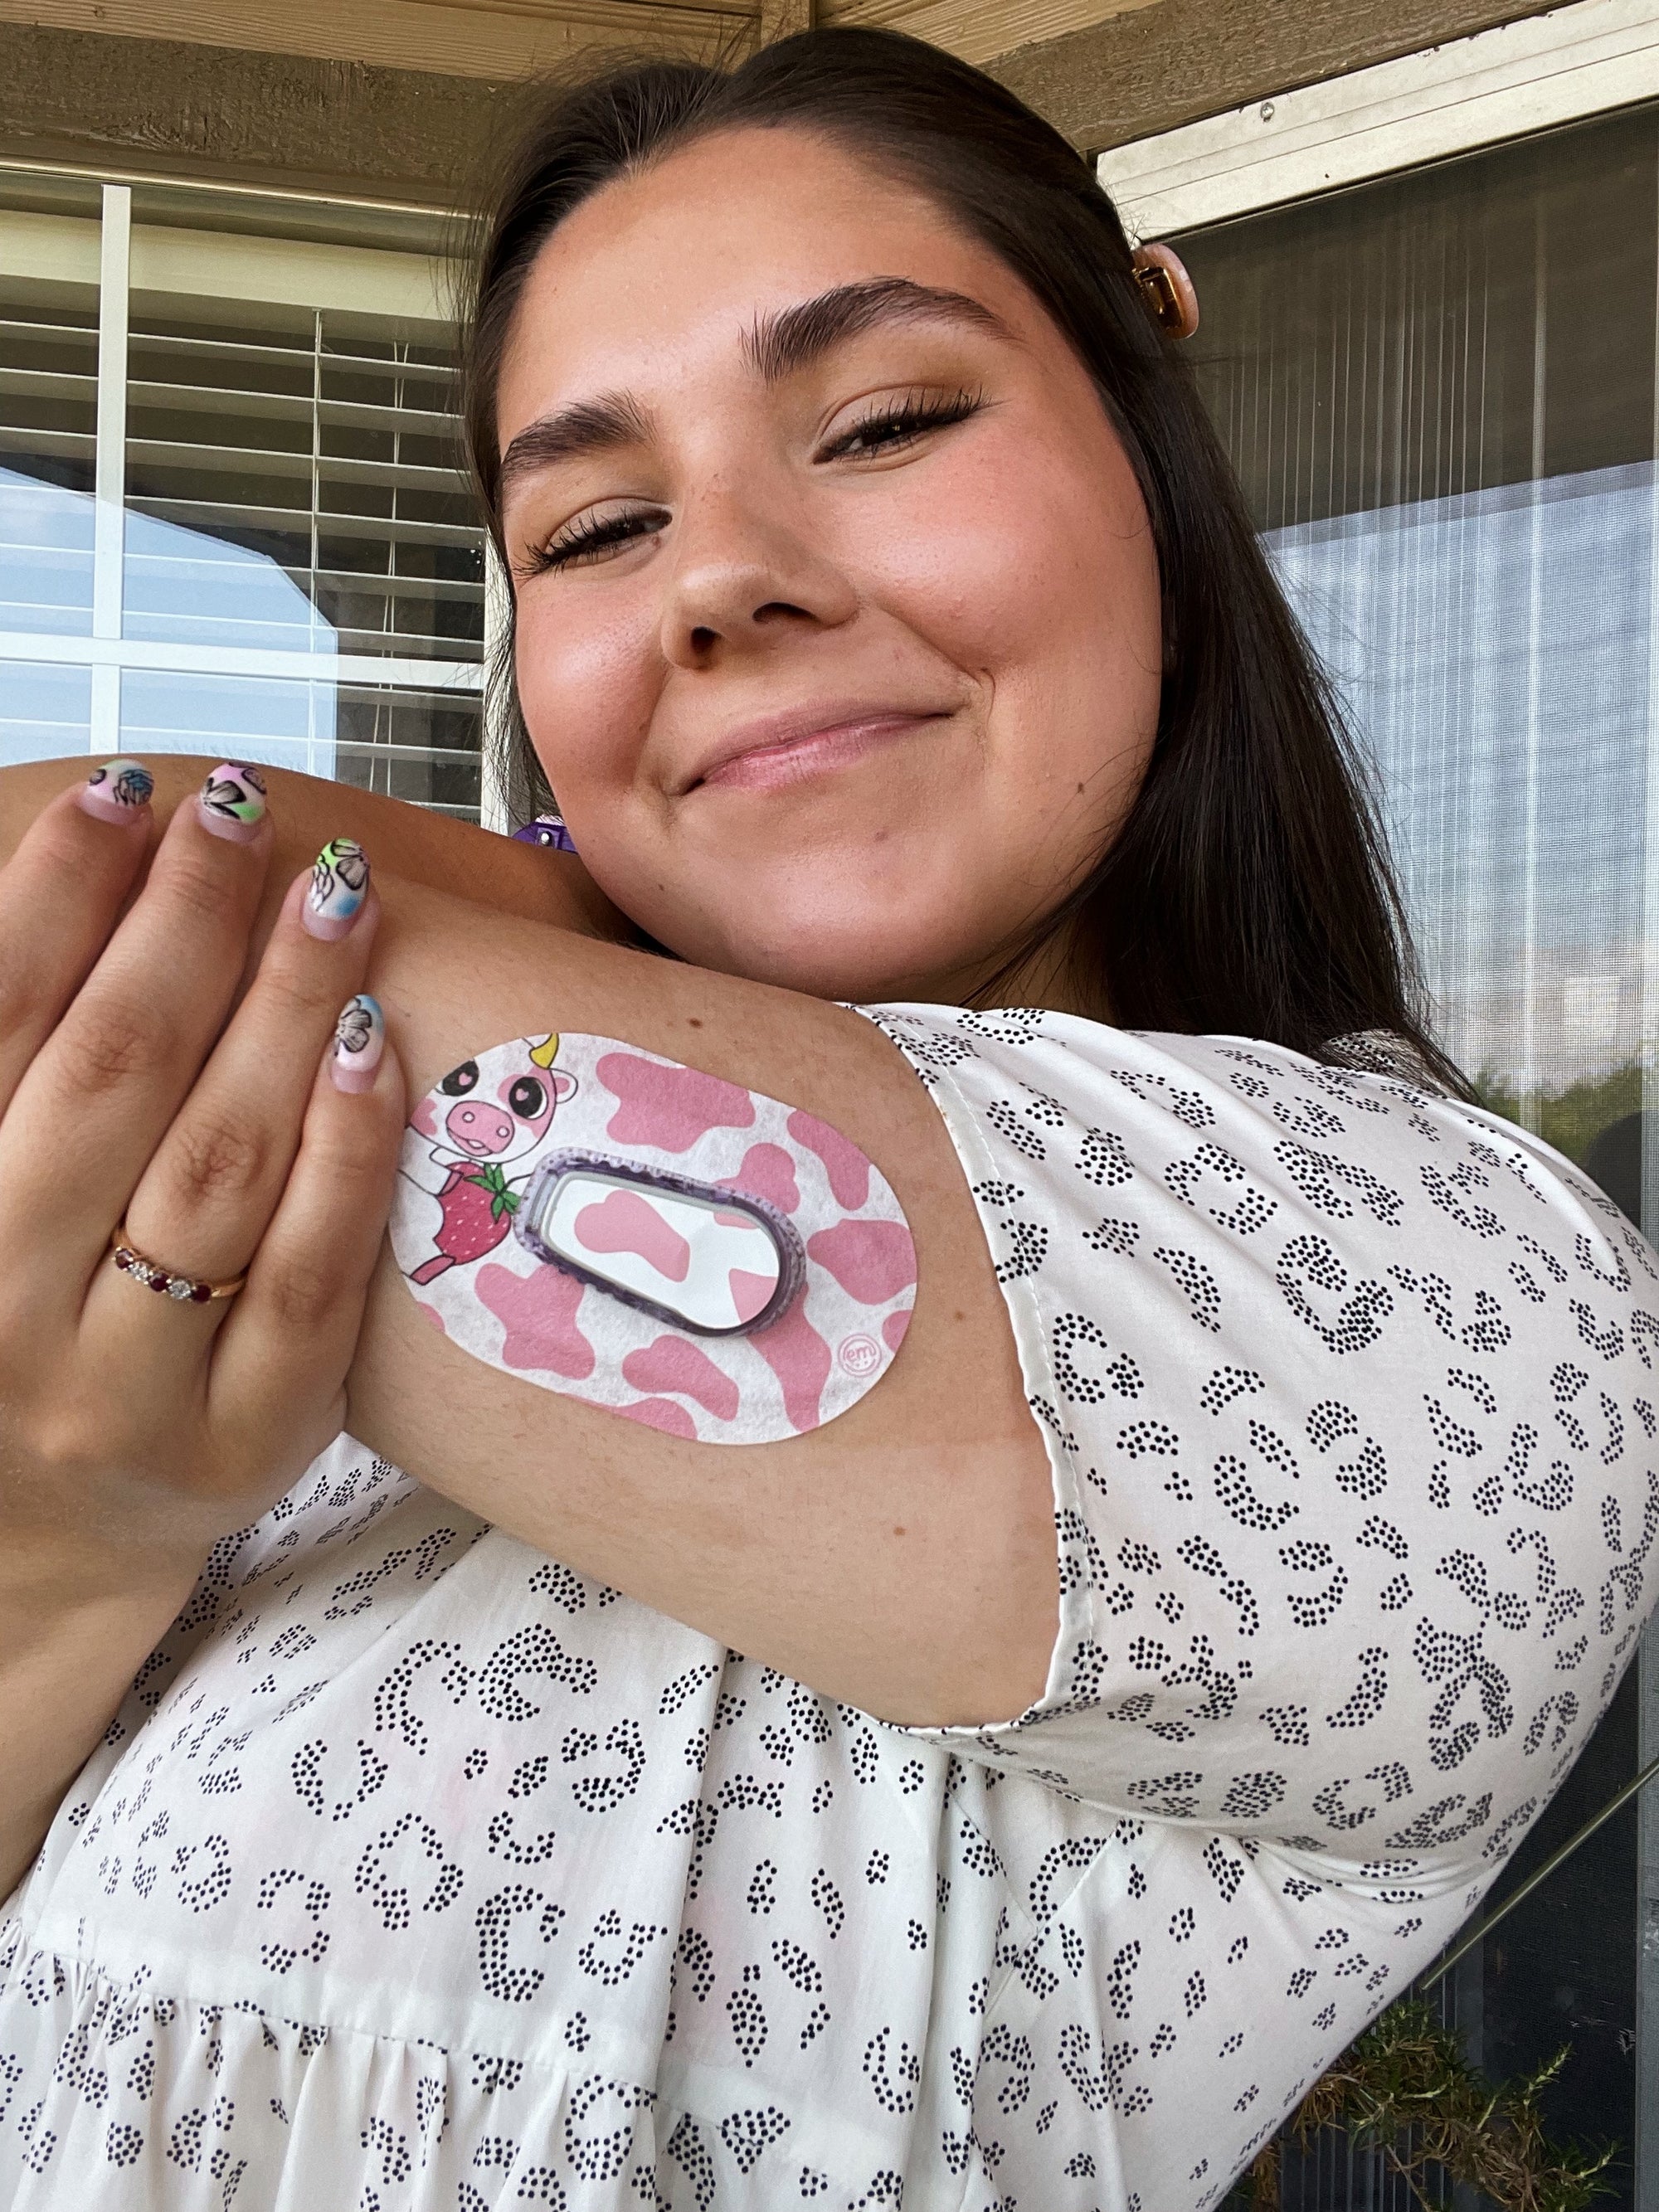 ExpressionMed Strawberry Cow Dexcom G6 Mini Tape, Single Tape and Single Sticker, Woman Wearing Cow Themed CGM Adhesive Patch Design